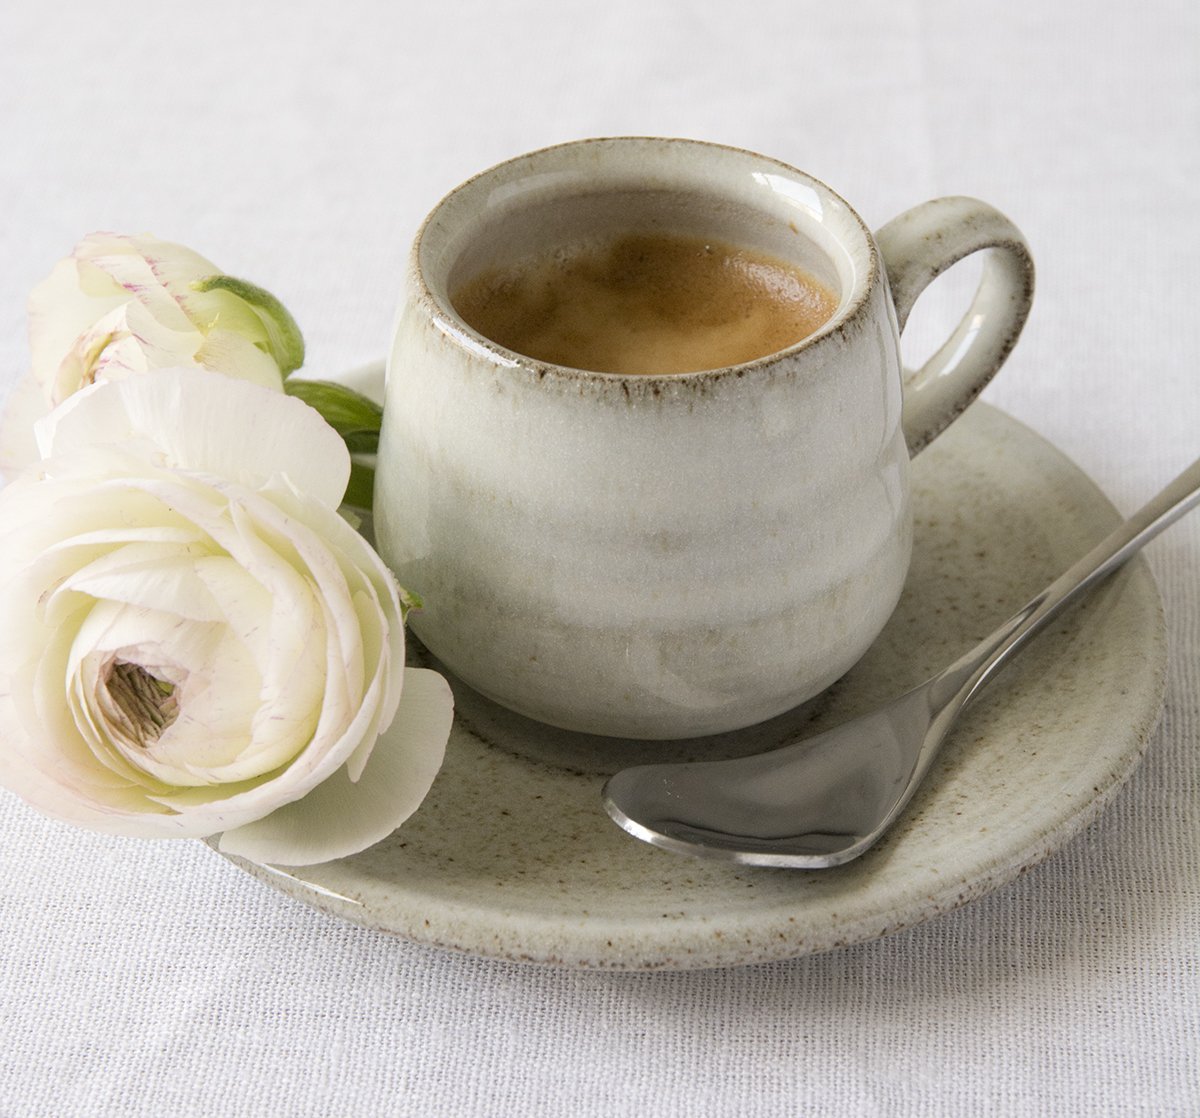 White Pottery Espresso Cup With Saucer - Mad About Pottery - cup